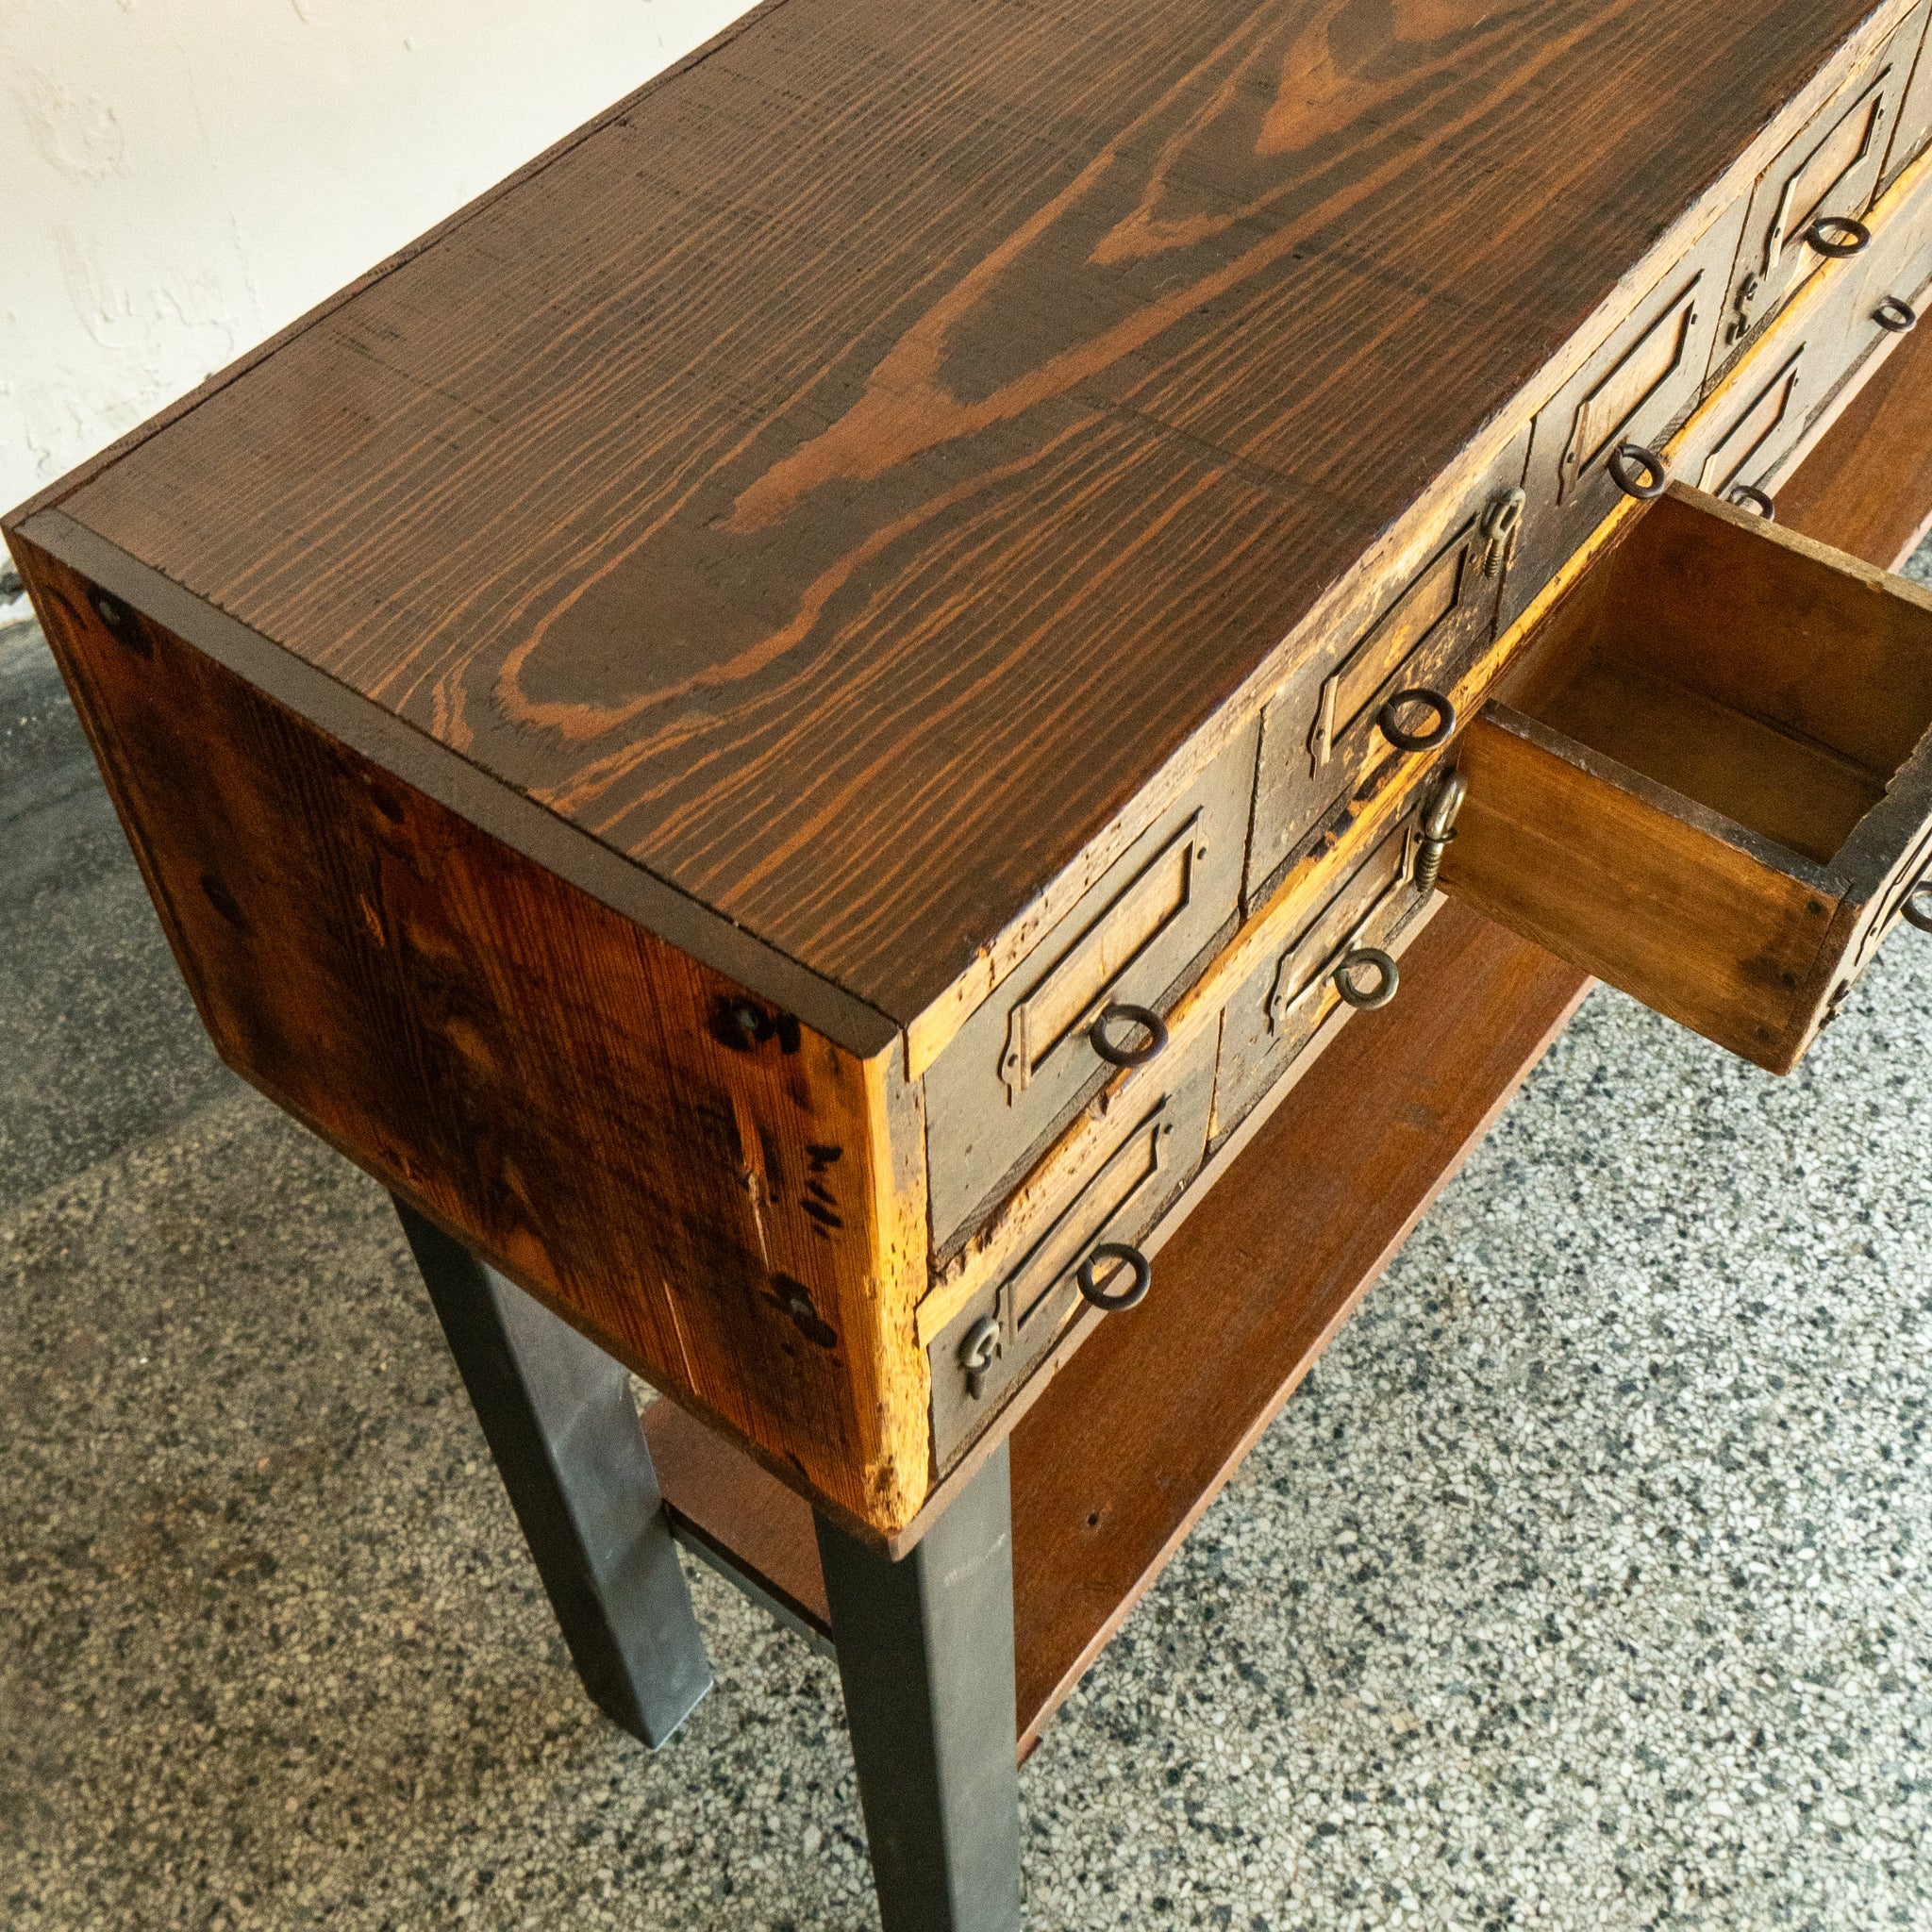 Detroit Hardware Co. Multi Drawer Entry Table No. 3